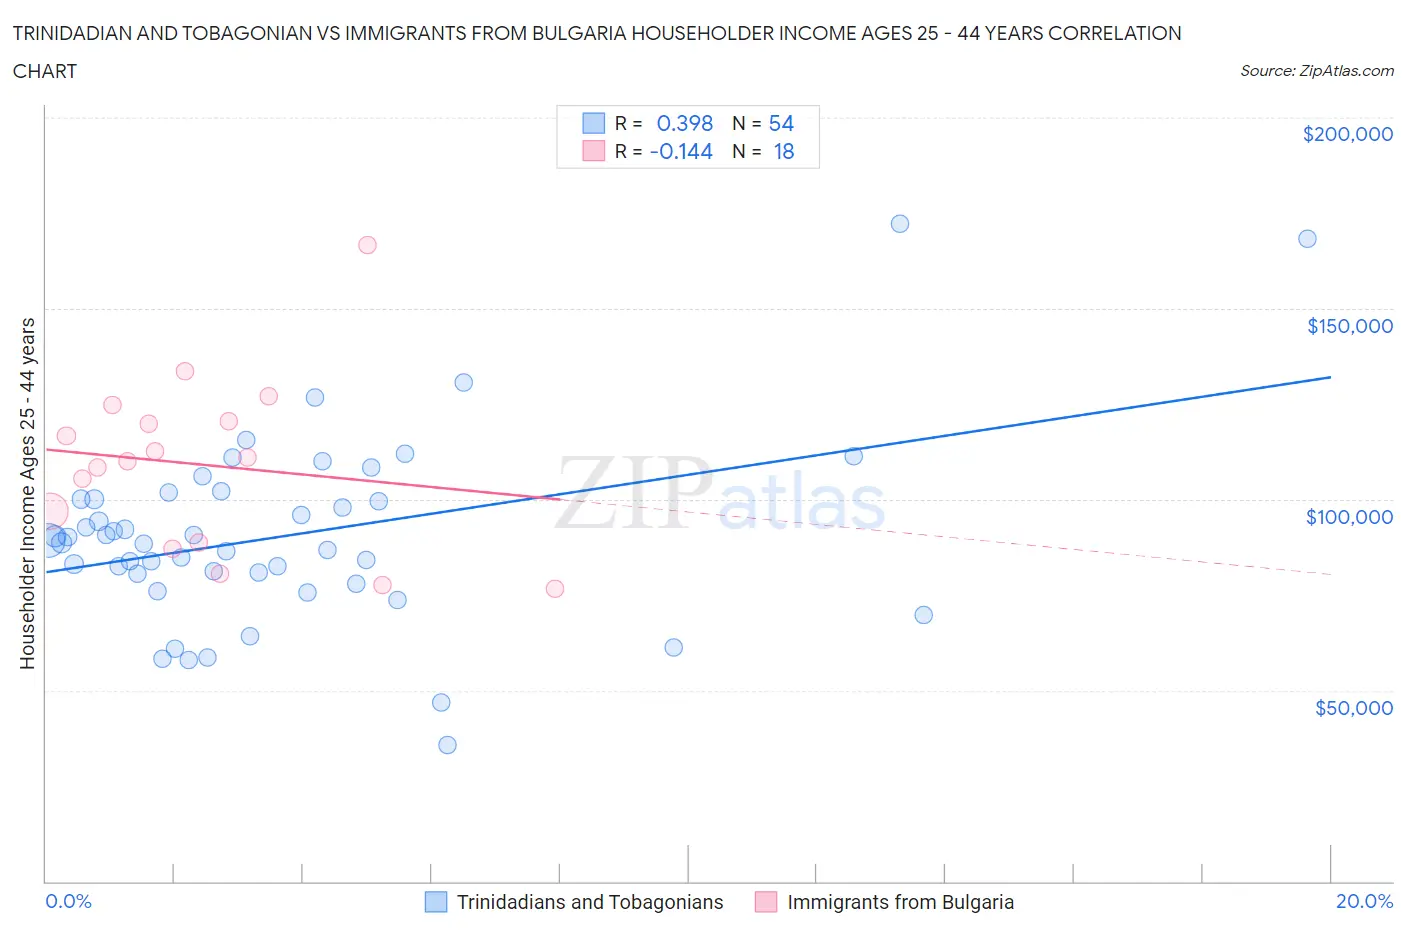 Trinidadian and Tobagonian vs Immigrants from Bulgaria Householder Income Ages 25 - 44 years